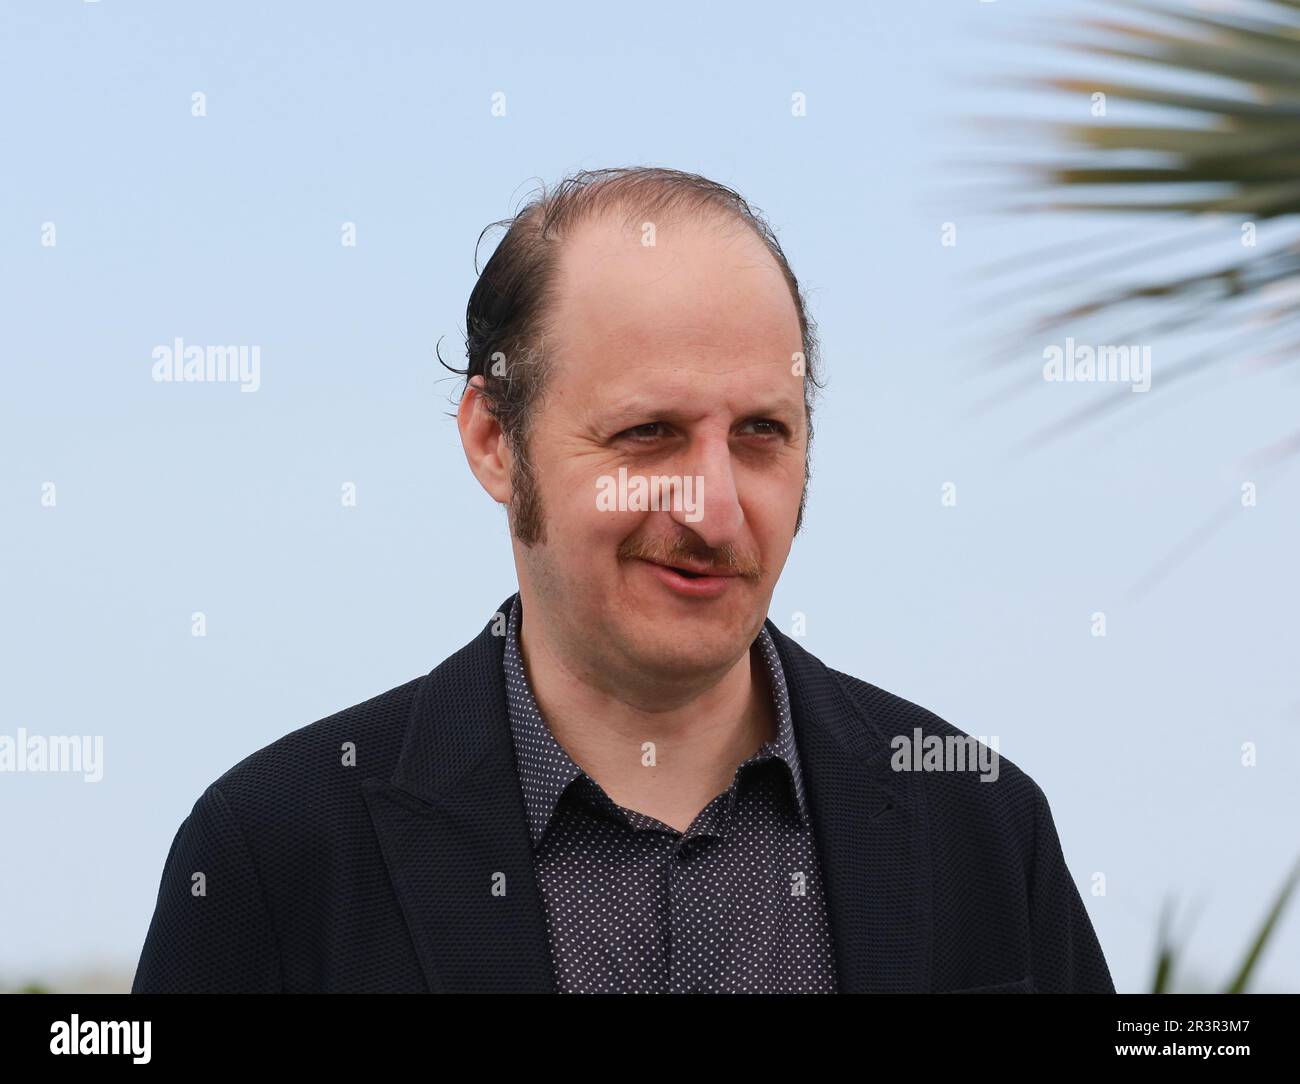 Cannes, France, 24th May, 2023. Fausto Russo Alesi at the photo call for the film Kidnapped (Rapito) at the 76th Cannes Film Festival. Photo Credit: Doreen Kennedy / Alamy Live News. Stock Photo